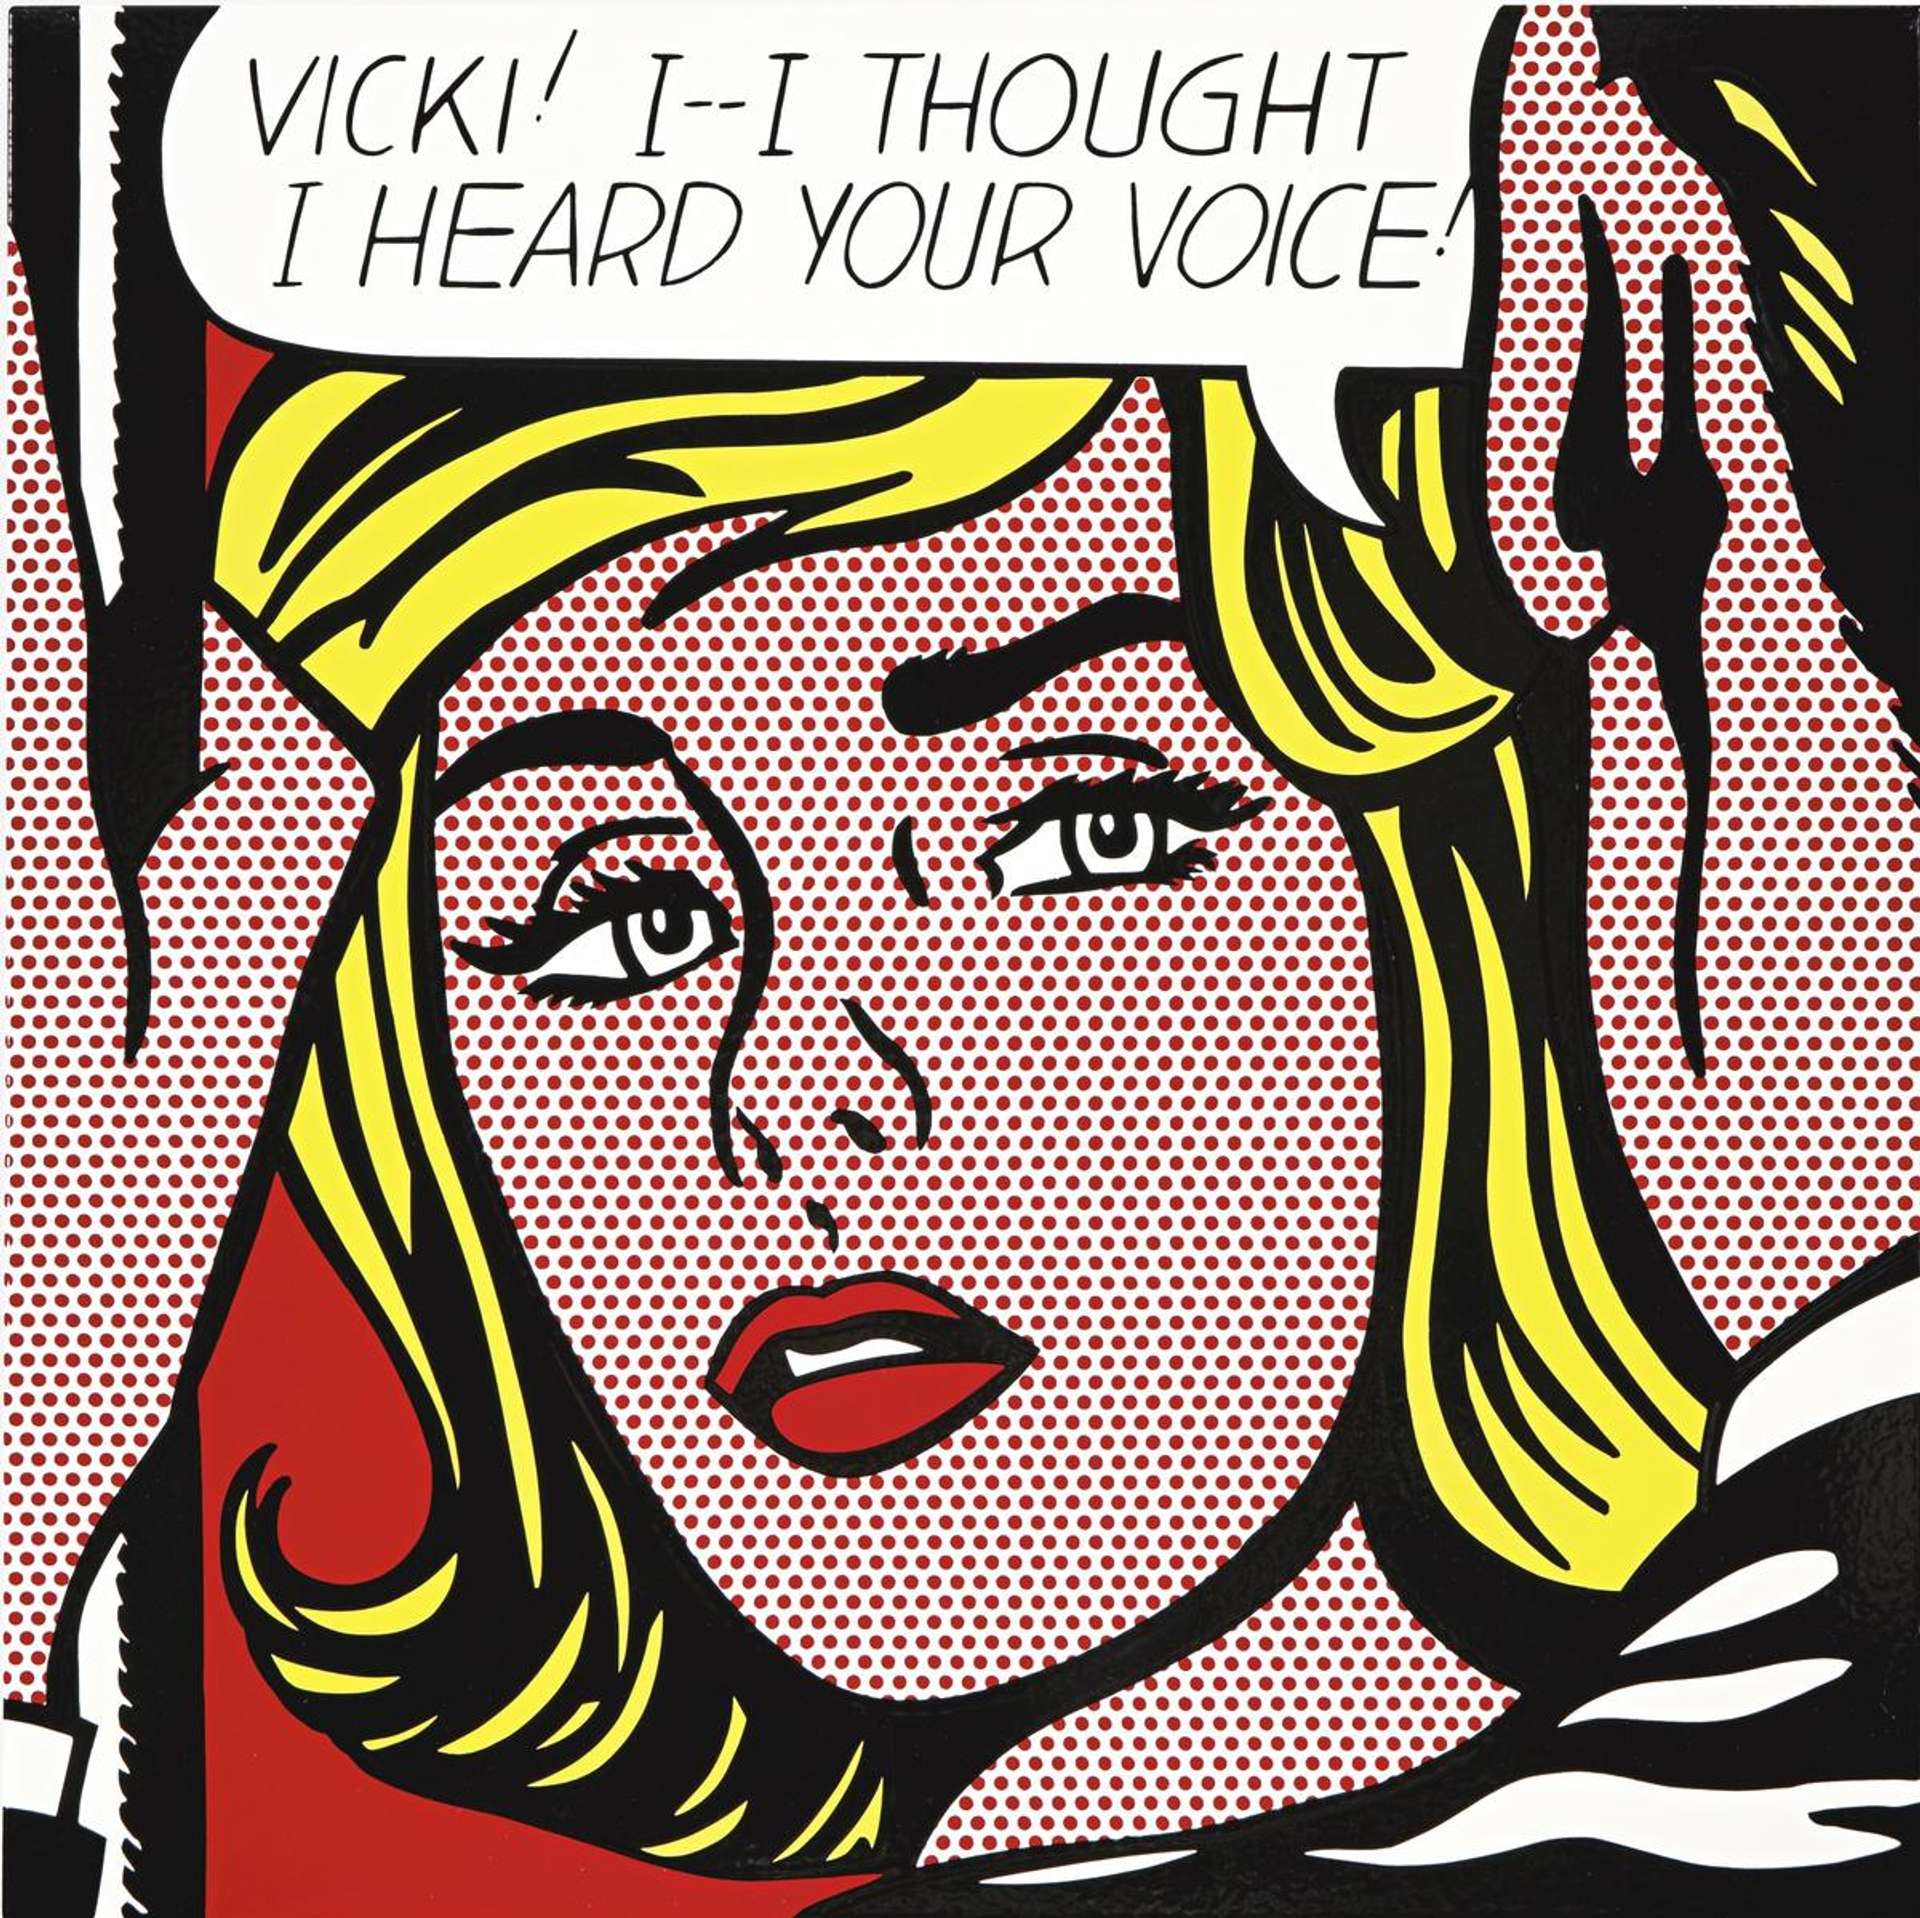 Vicki! I-I Thought I Heard Your Voice! by Roy Lichtenstein